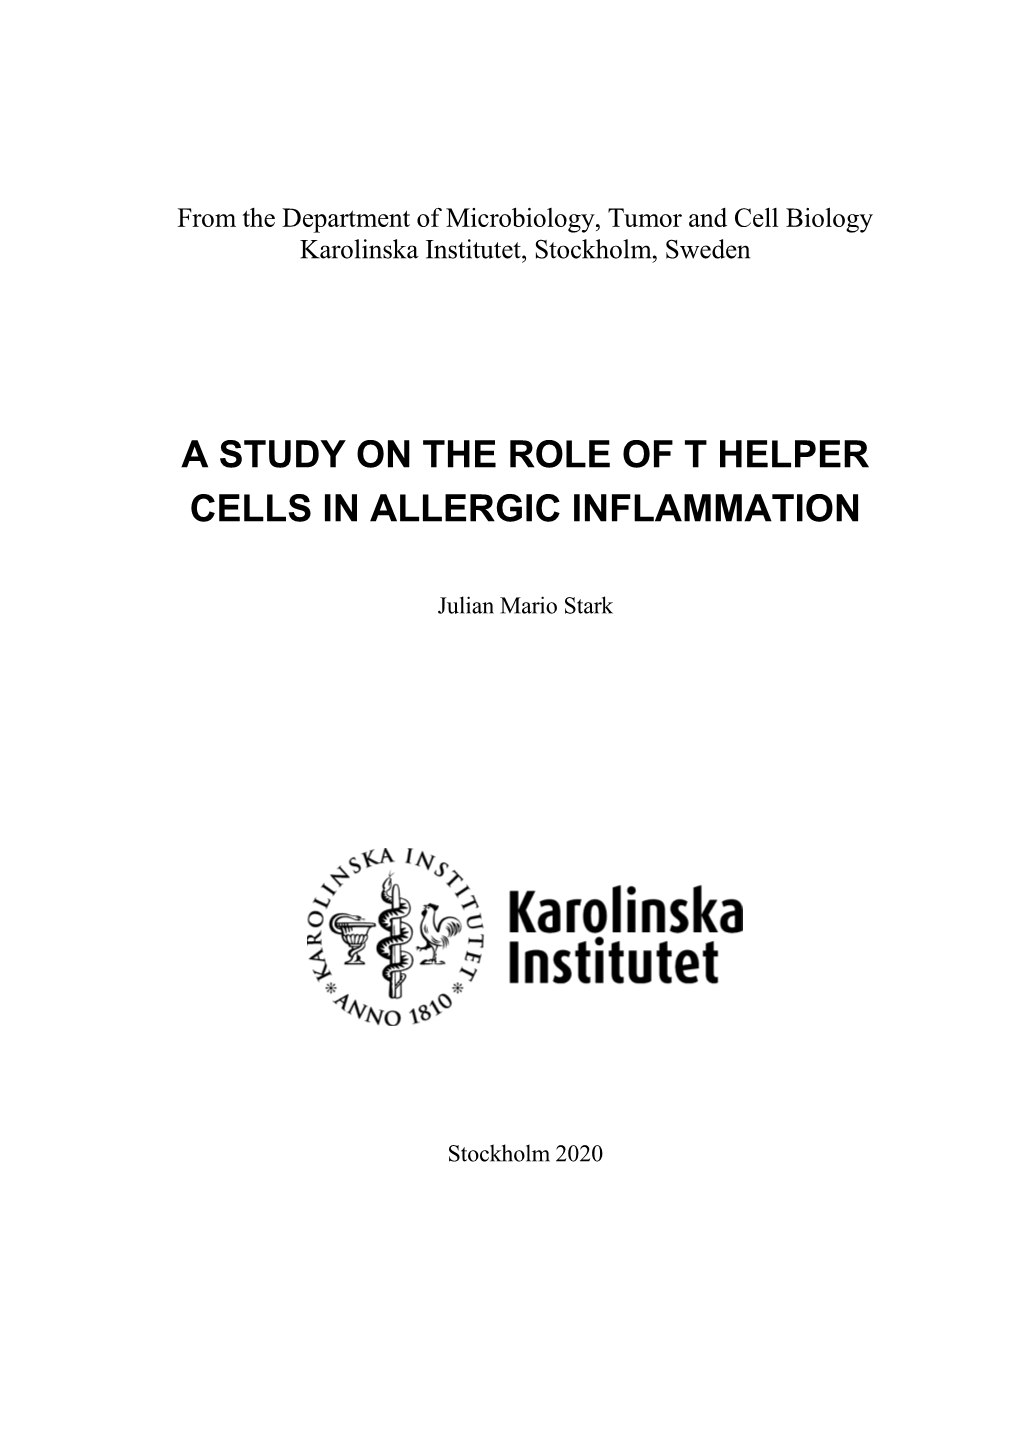 A Study on the Role of T Helper Cells in Allergic Inflammation